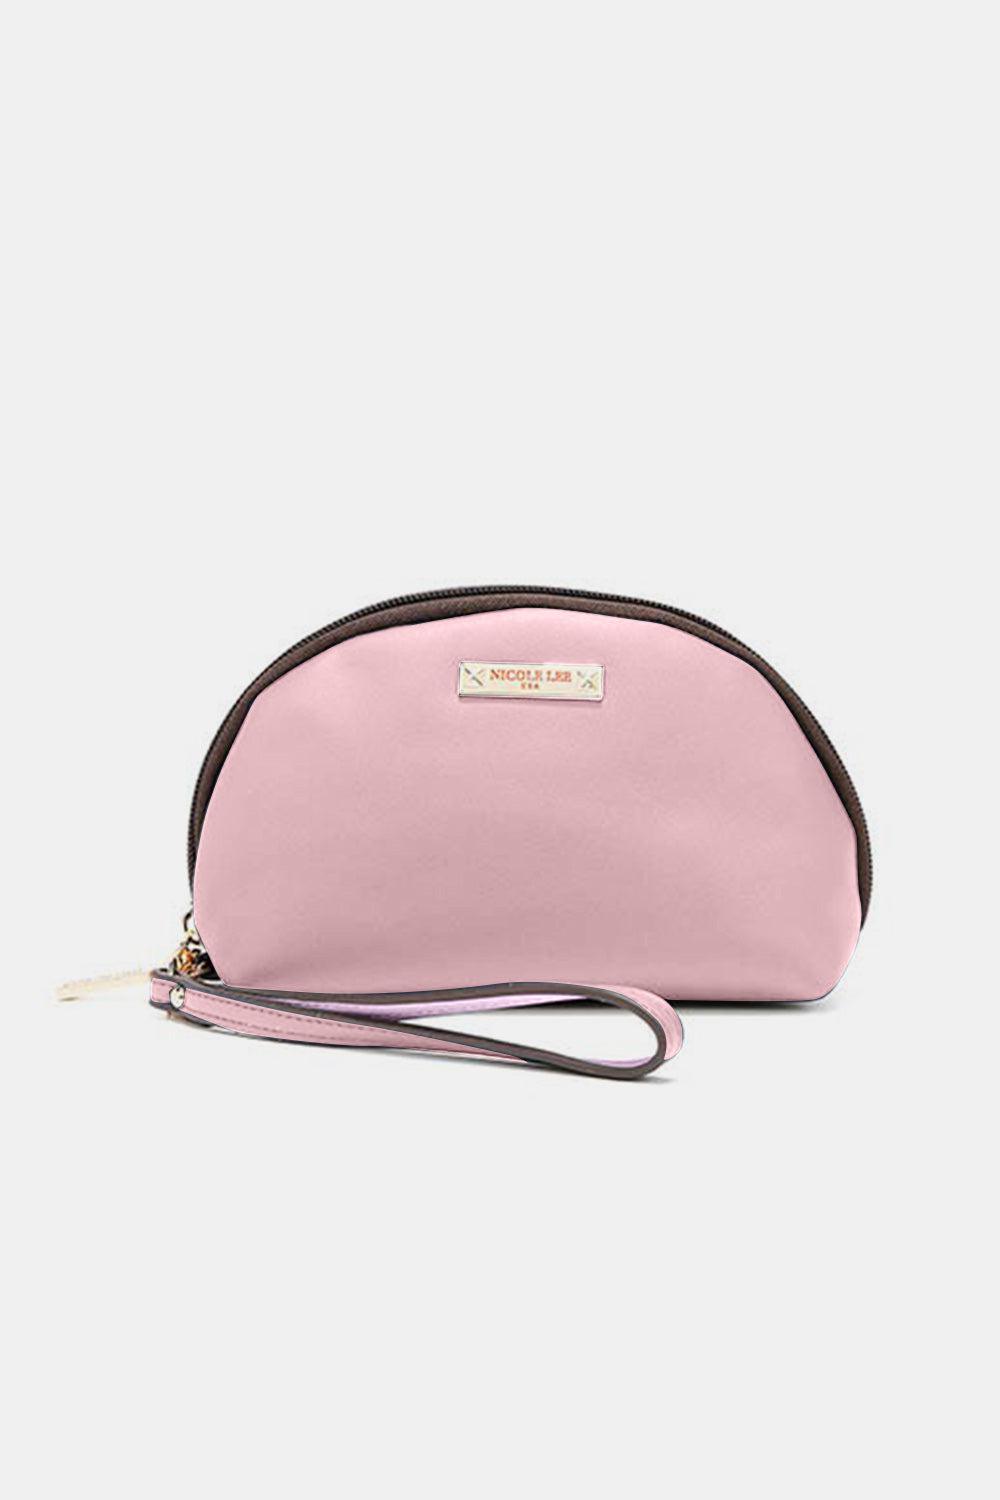 a pink purse with a brown strap